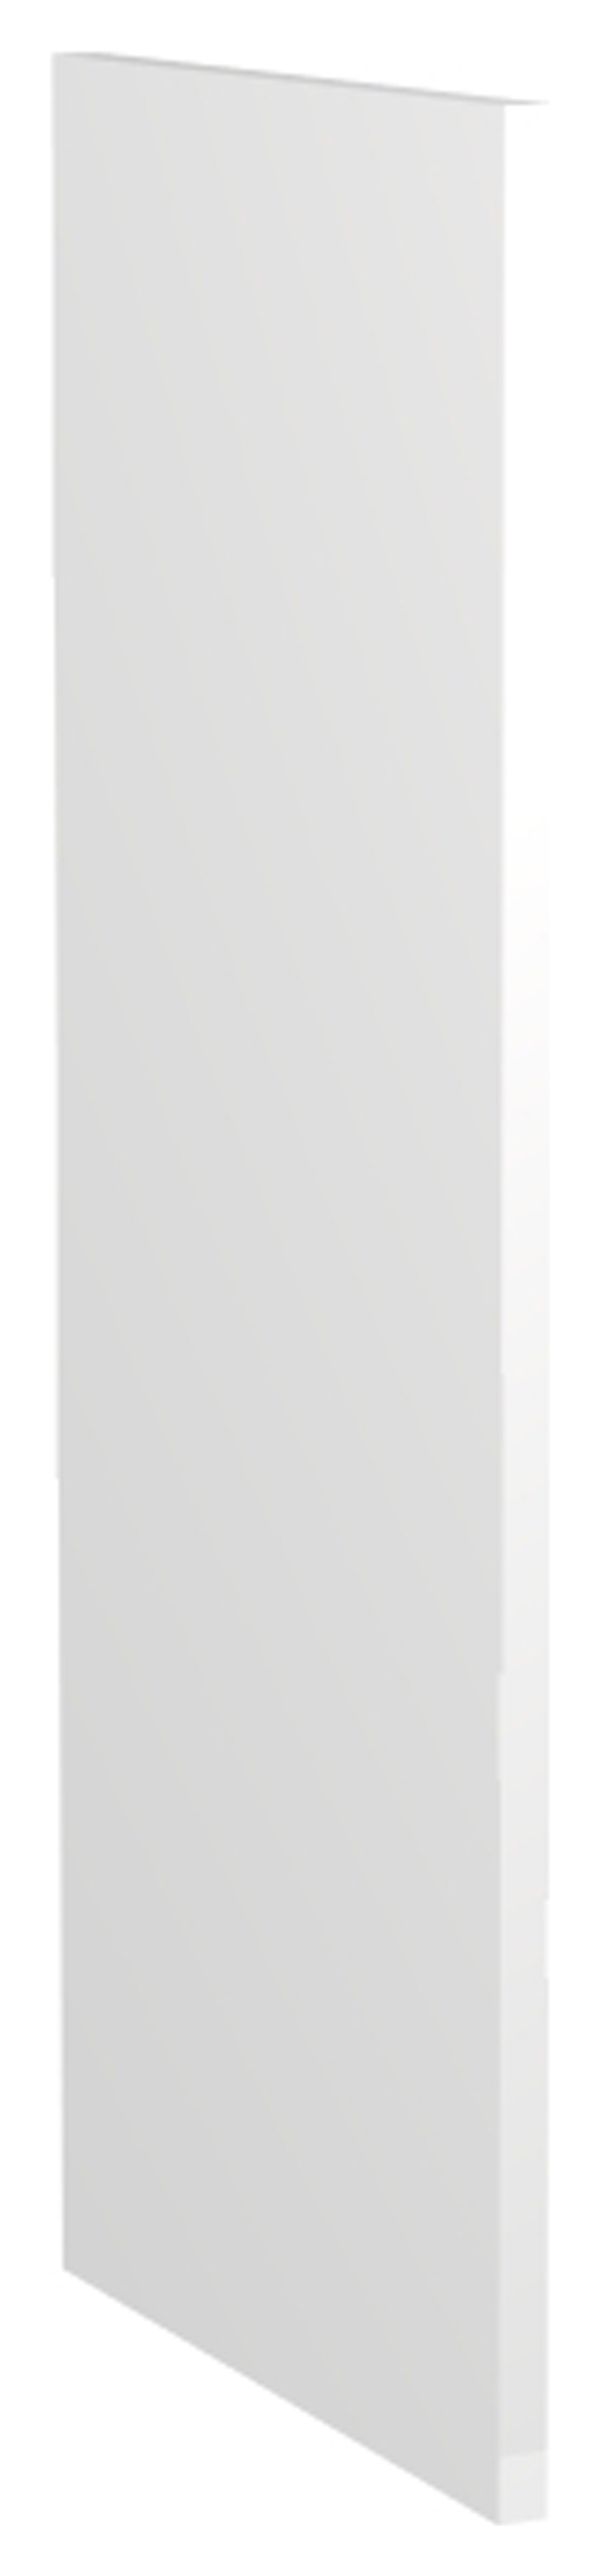 Image of Wickes Vienna Gloss White Wall Decor End Panel - 18mm